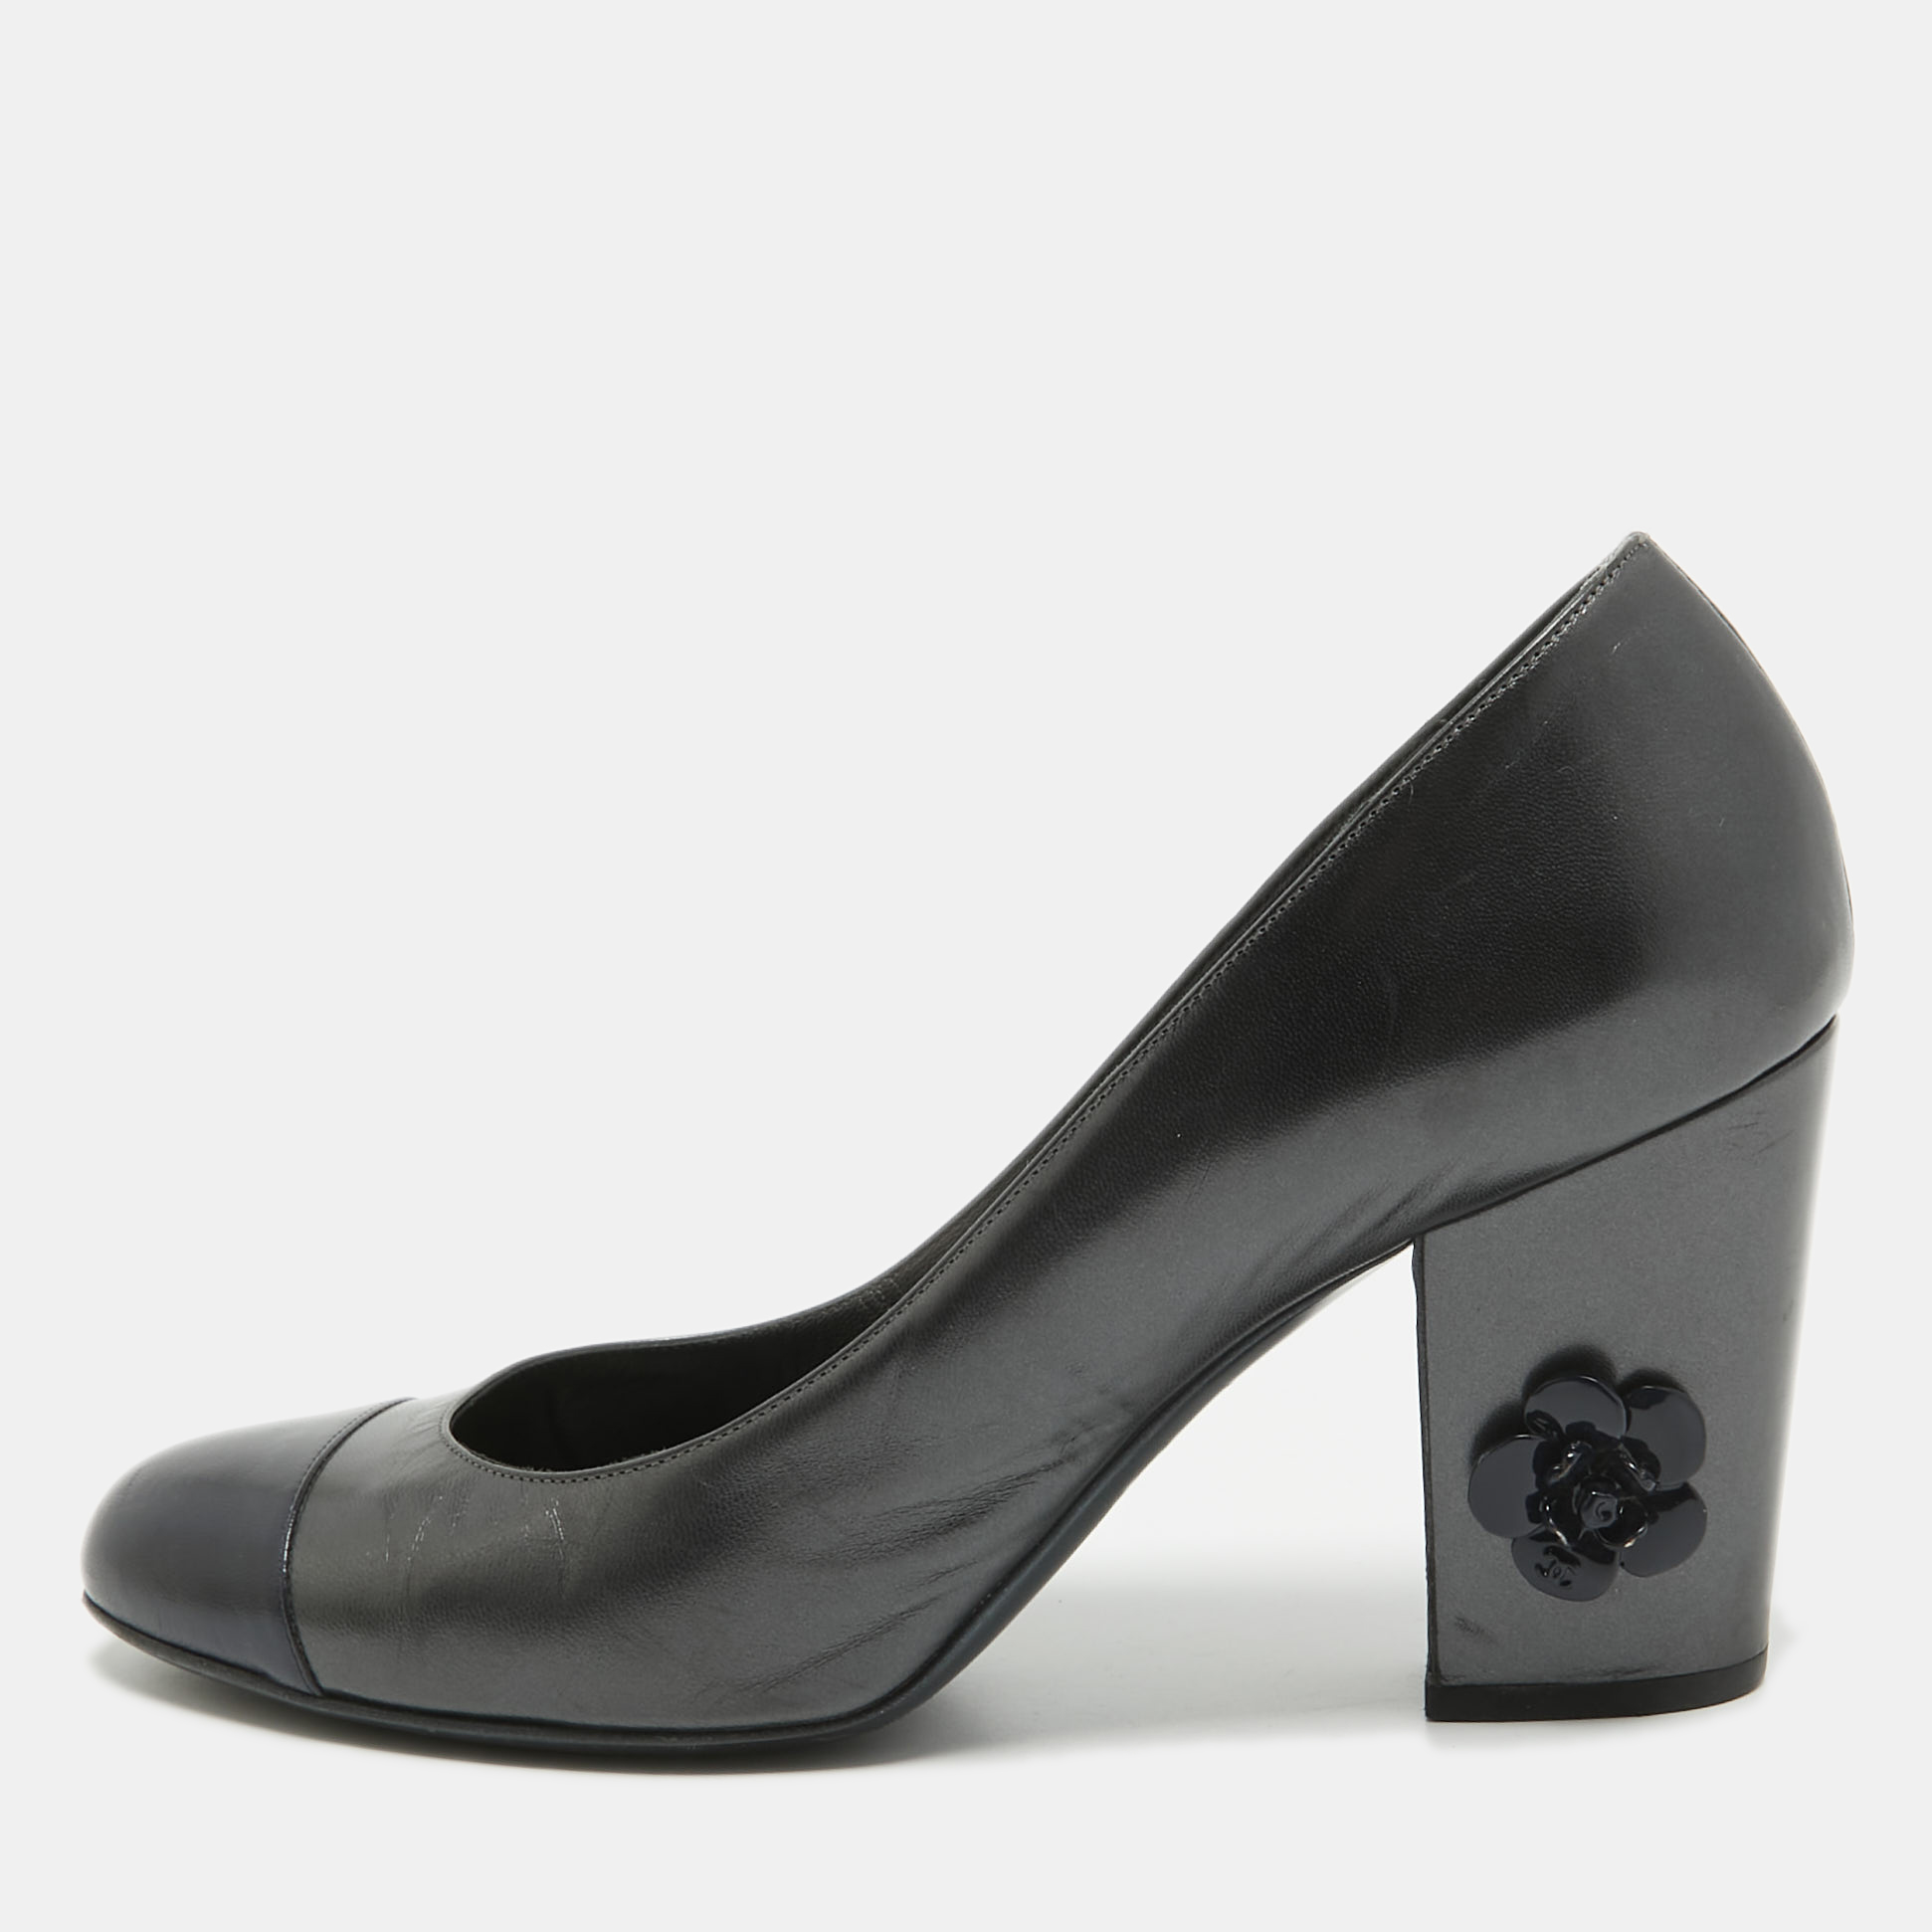 

Chanel Metallic Two Tone Leather Camellia Pumps Size